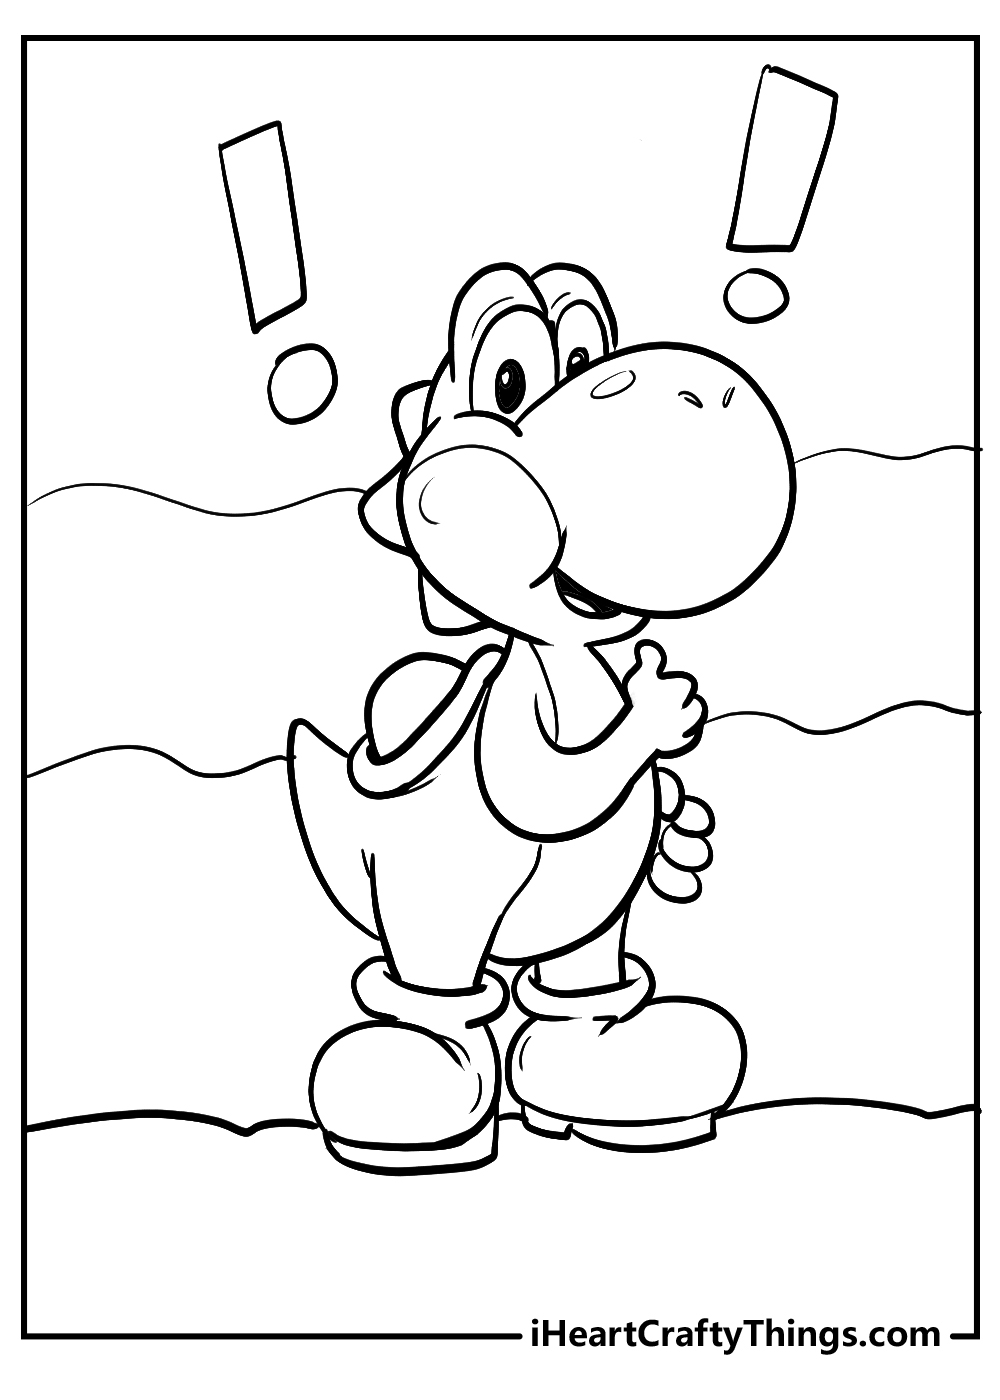 yoshi coloring pages for kids